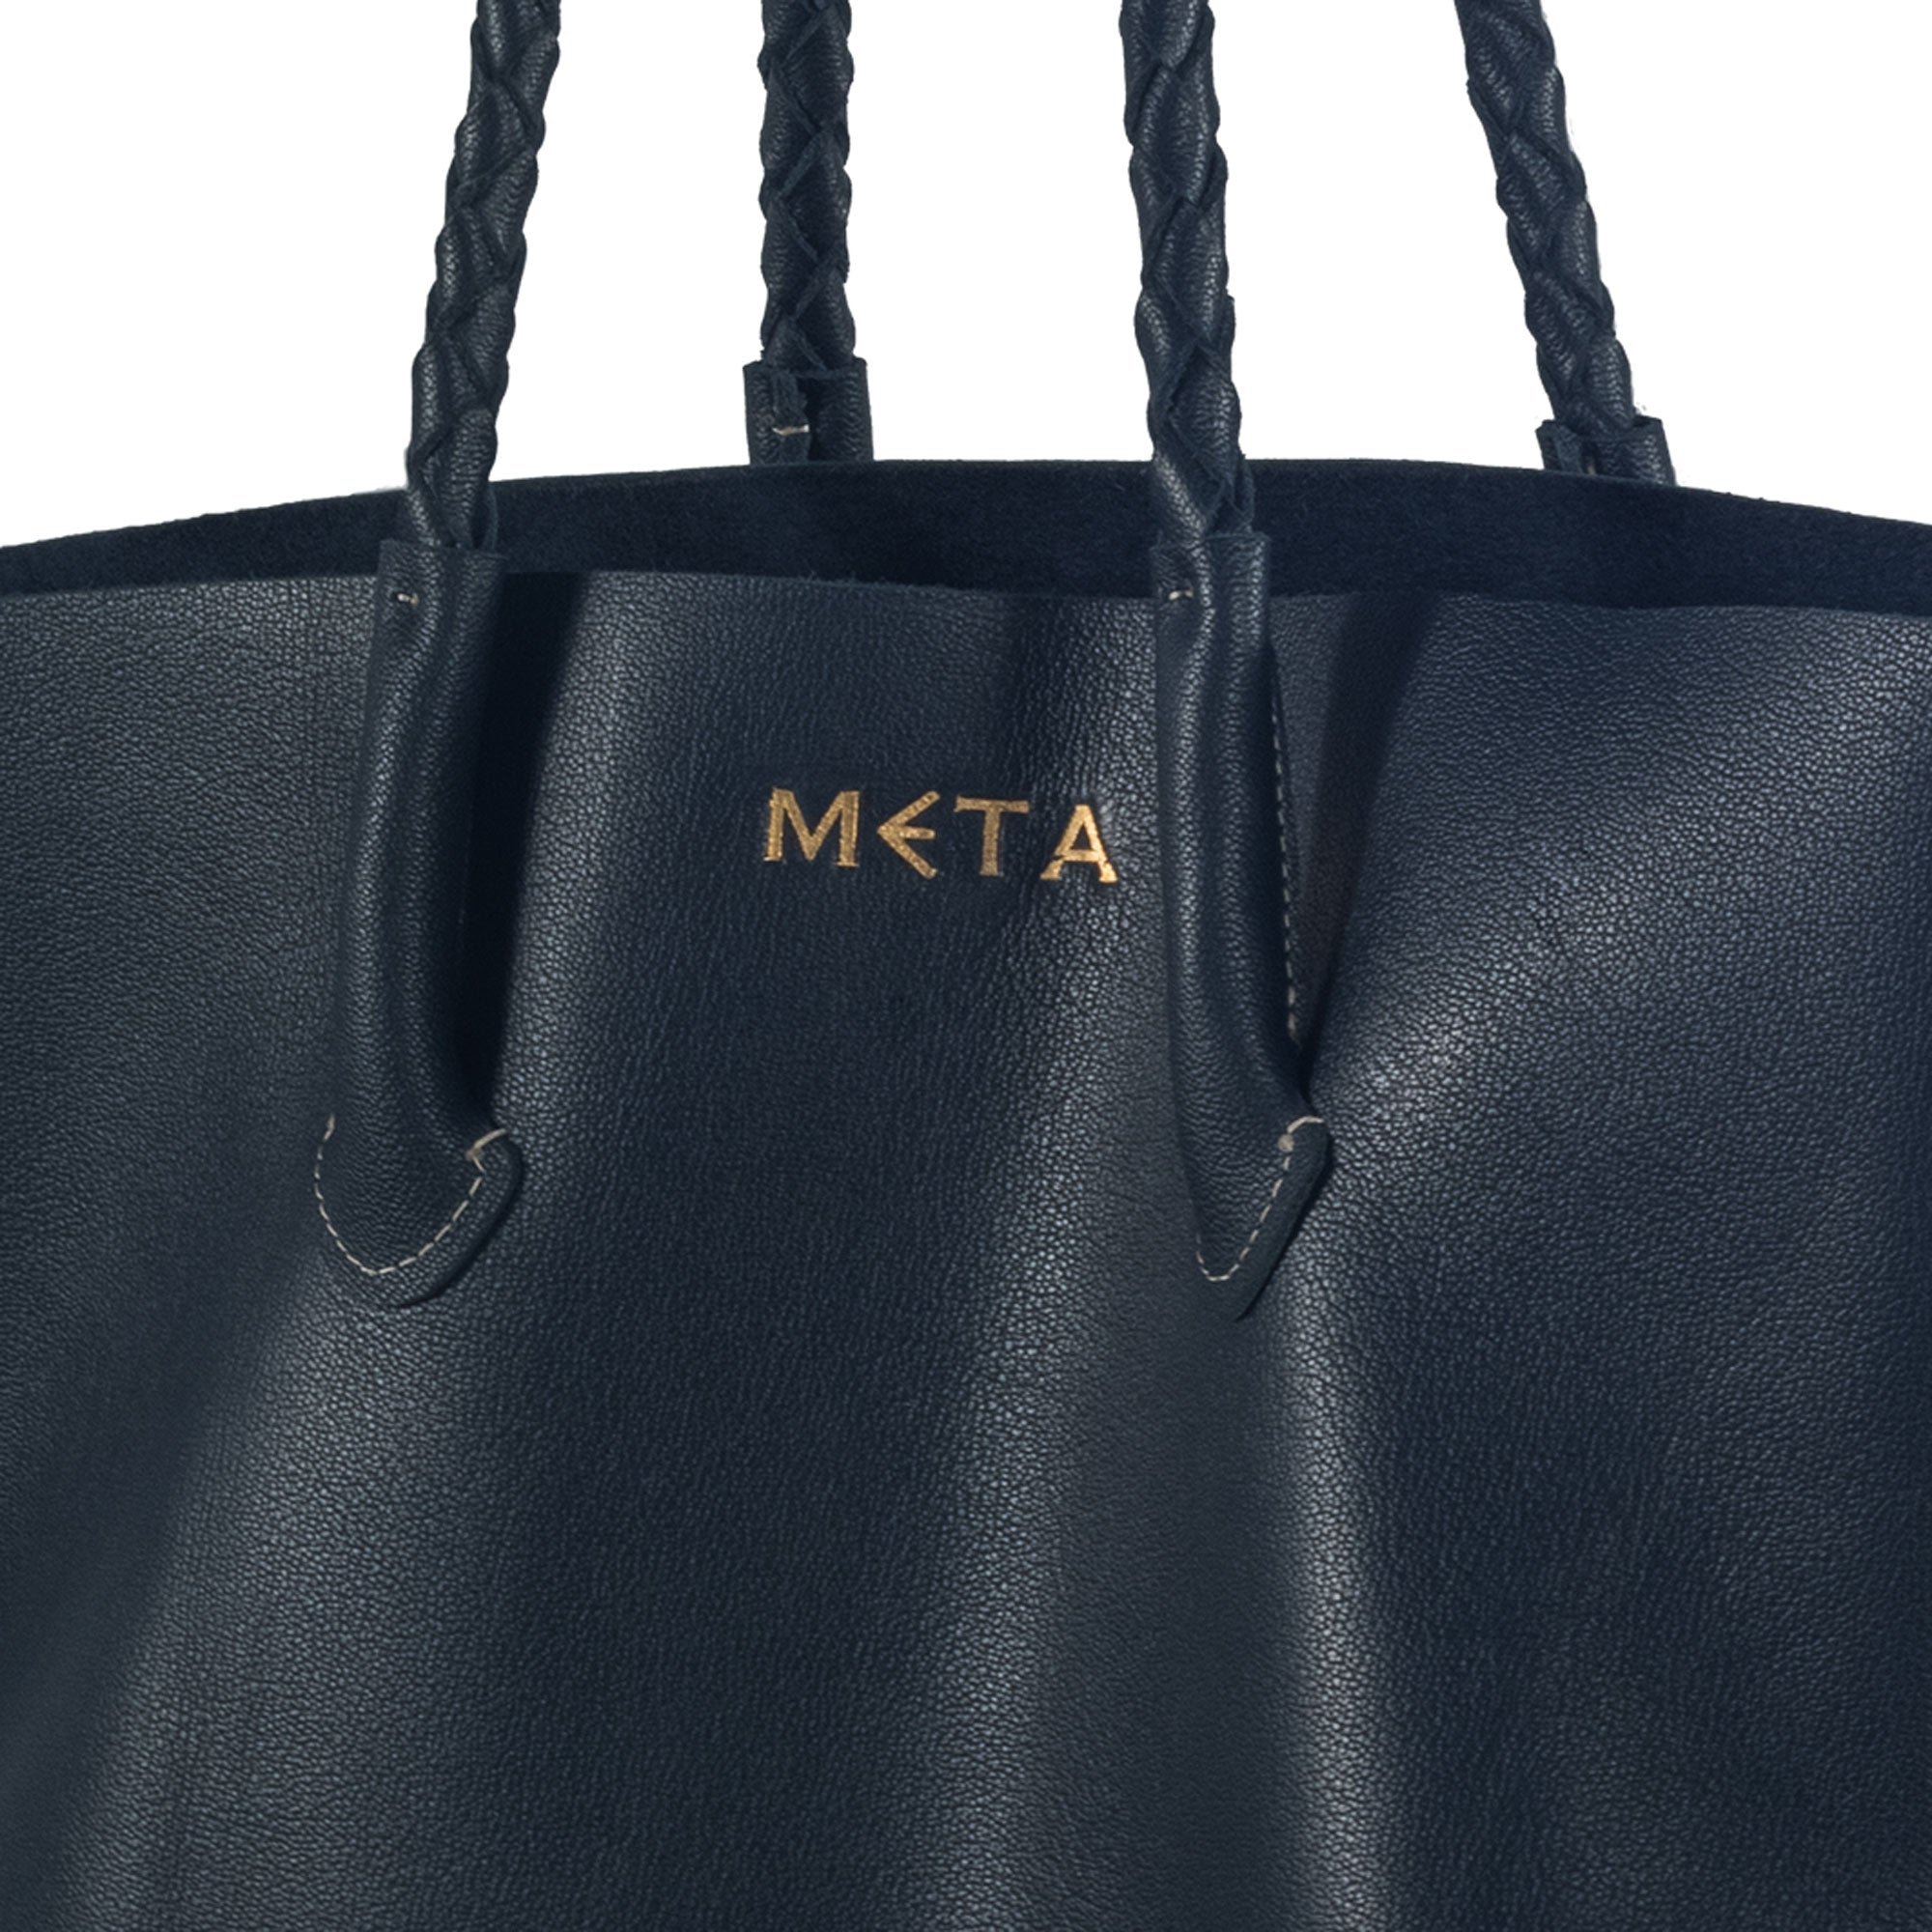 The Riviera Leather Tote Bag